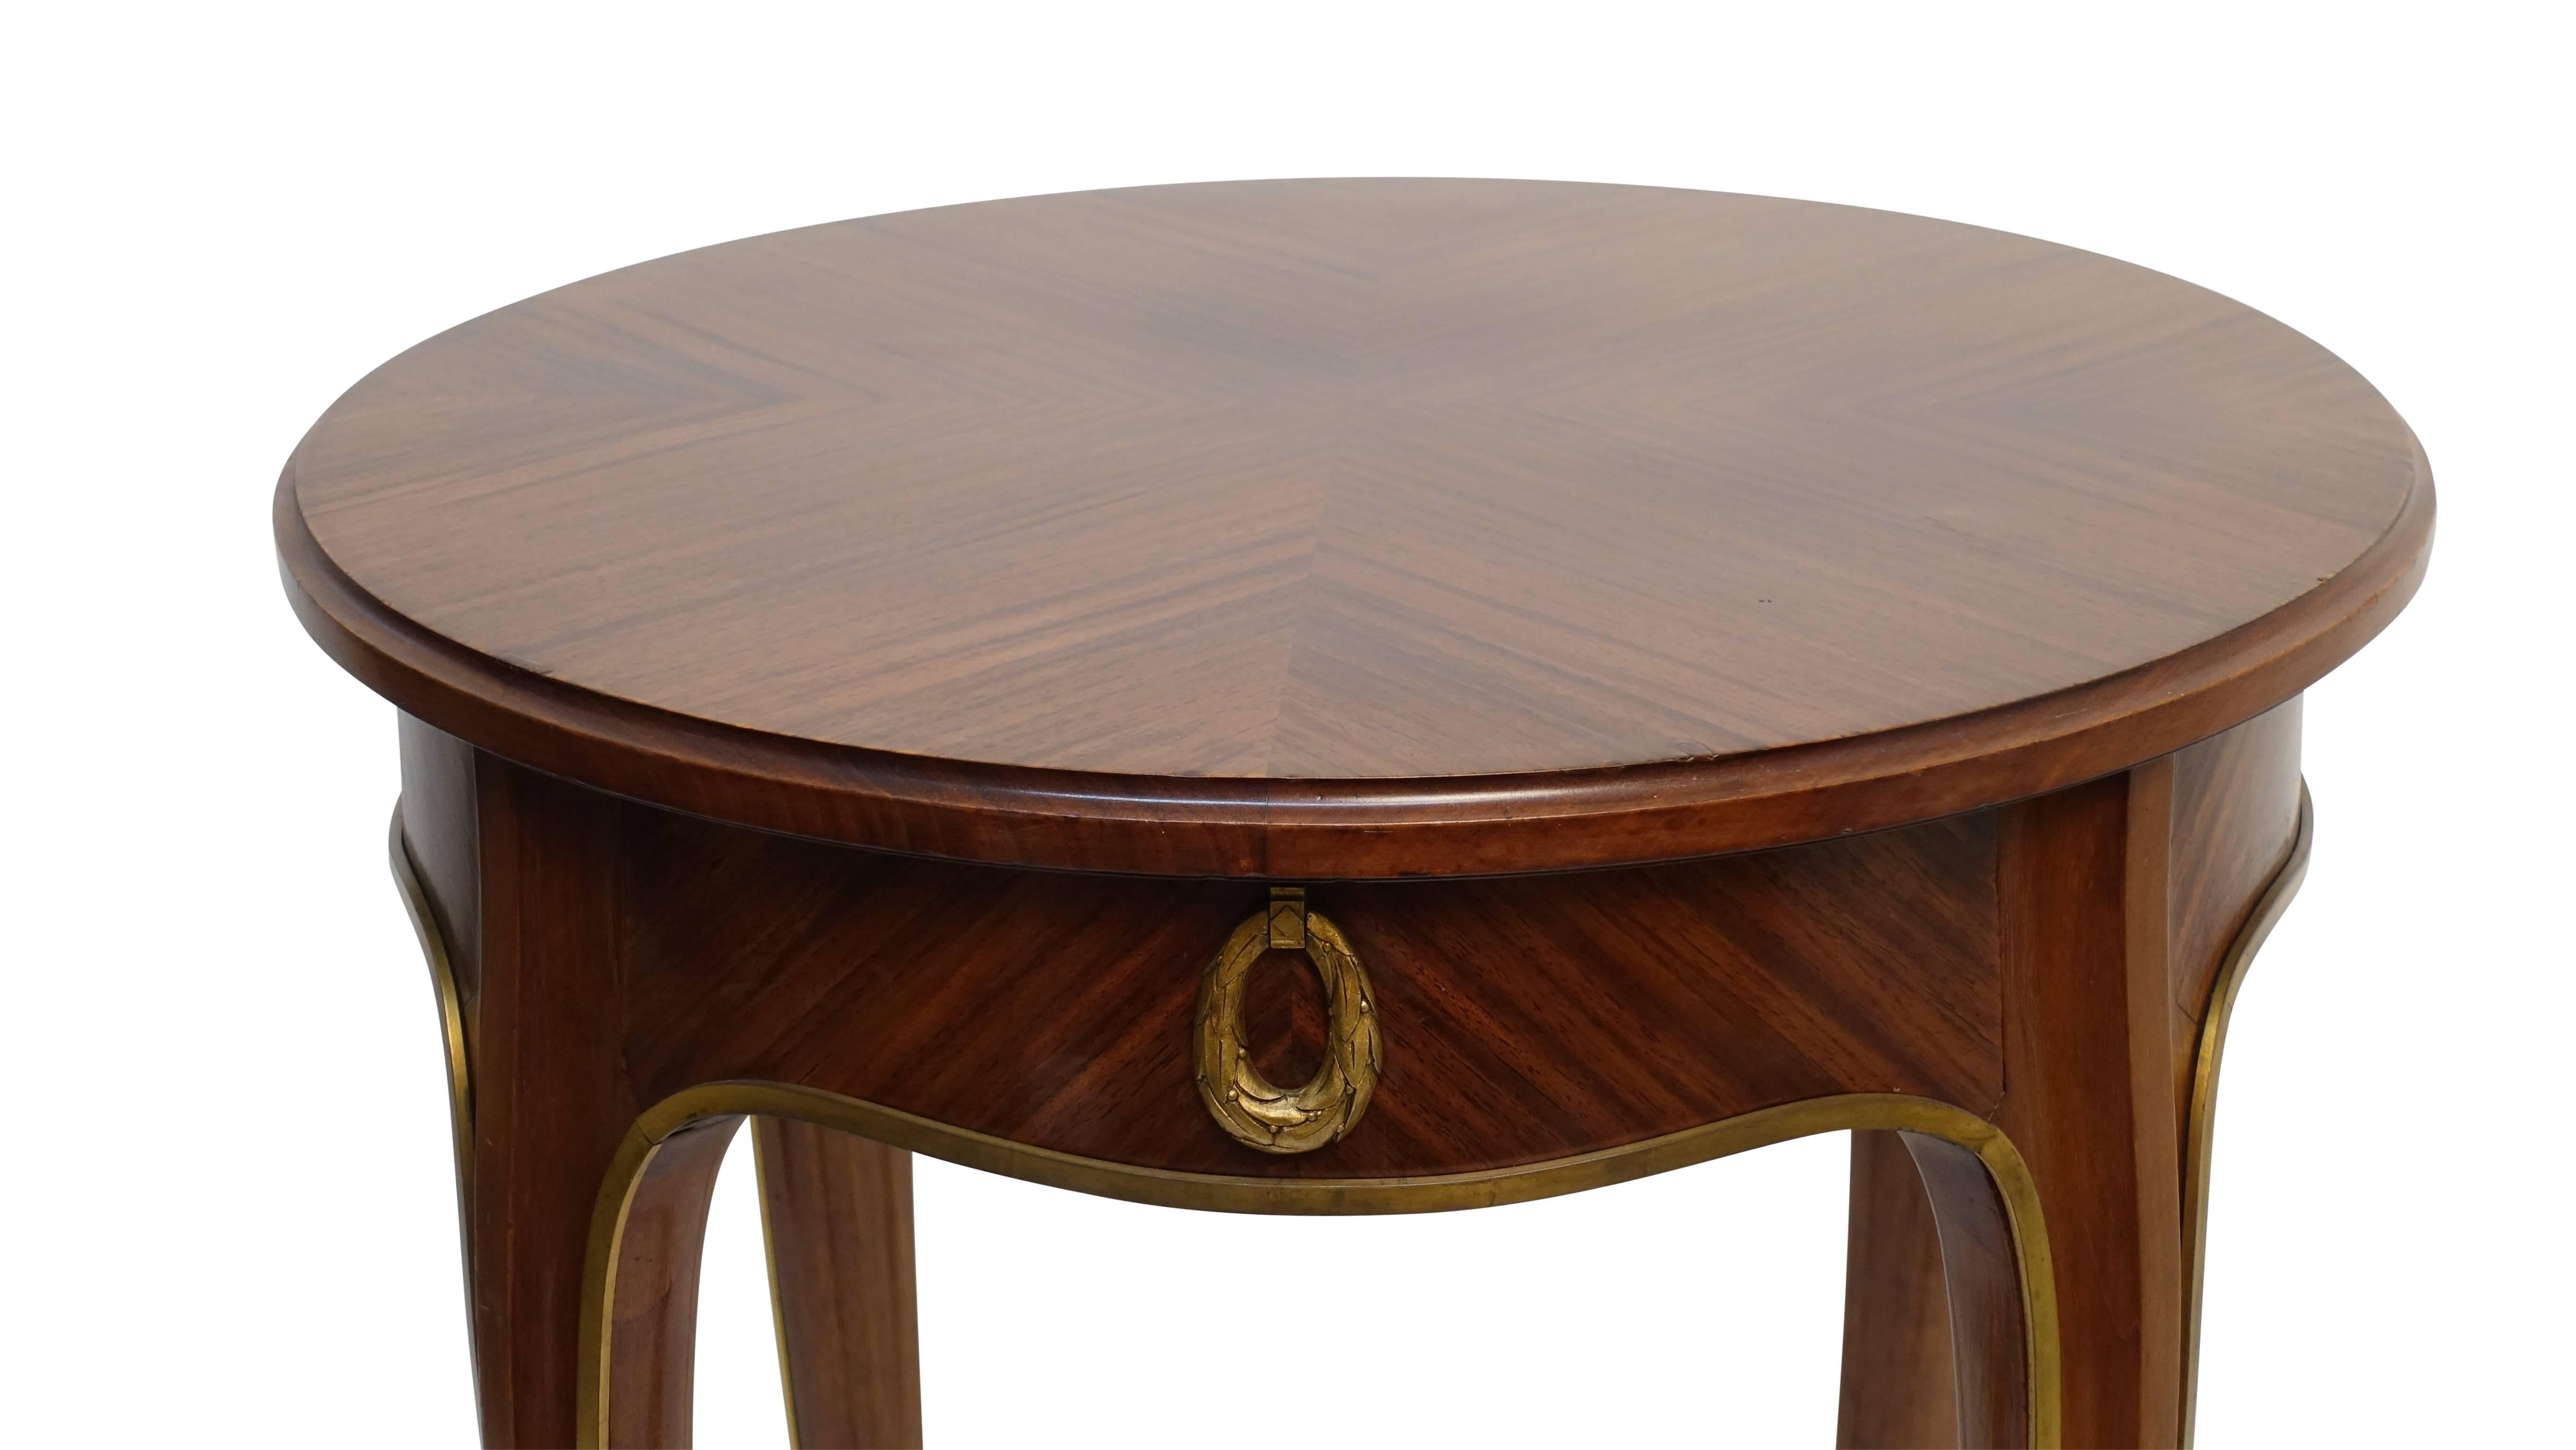 Louis XVI Style Mahogany Side Table with Drawer, French Early 20th century For Sale 1